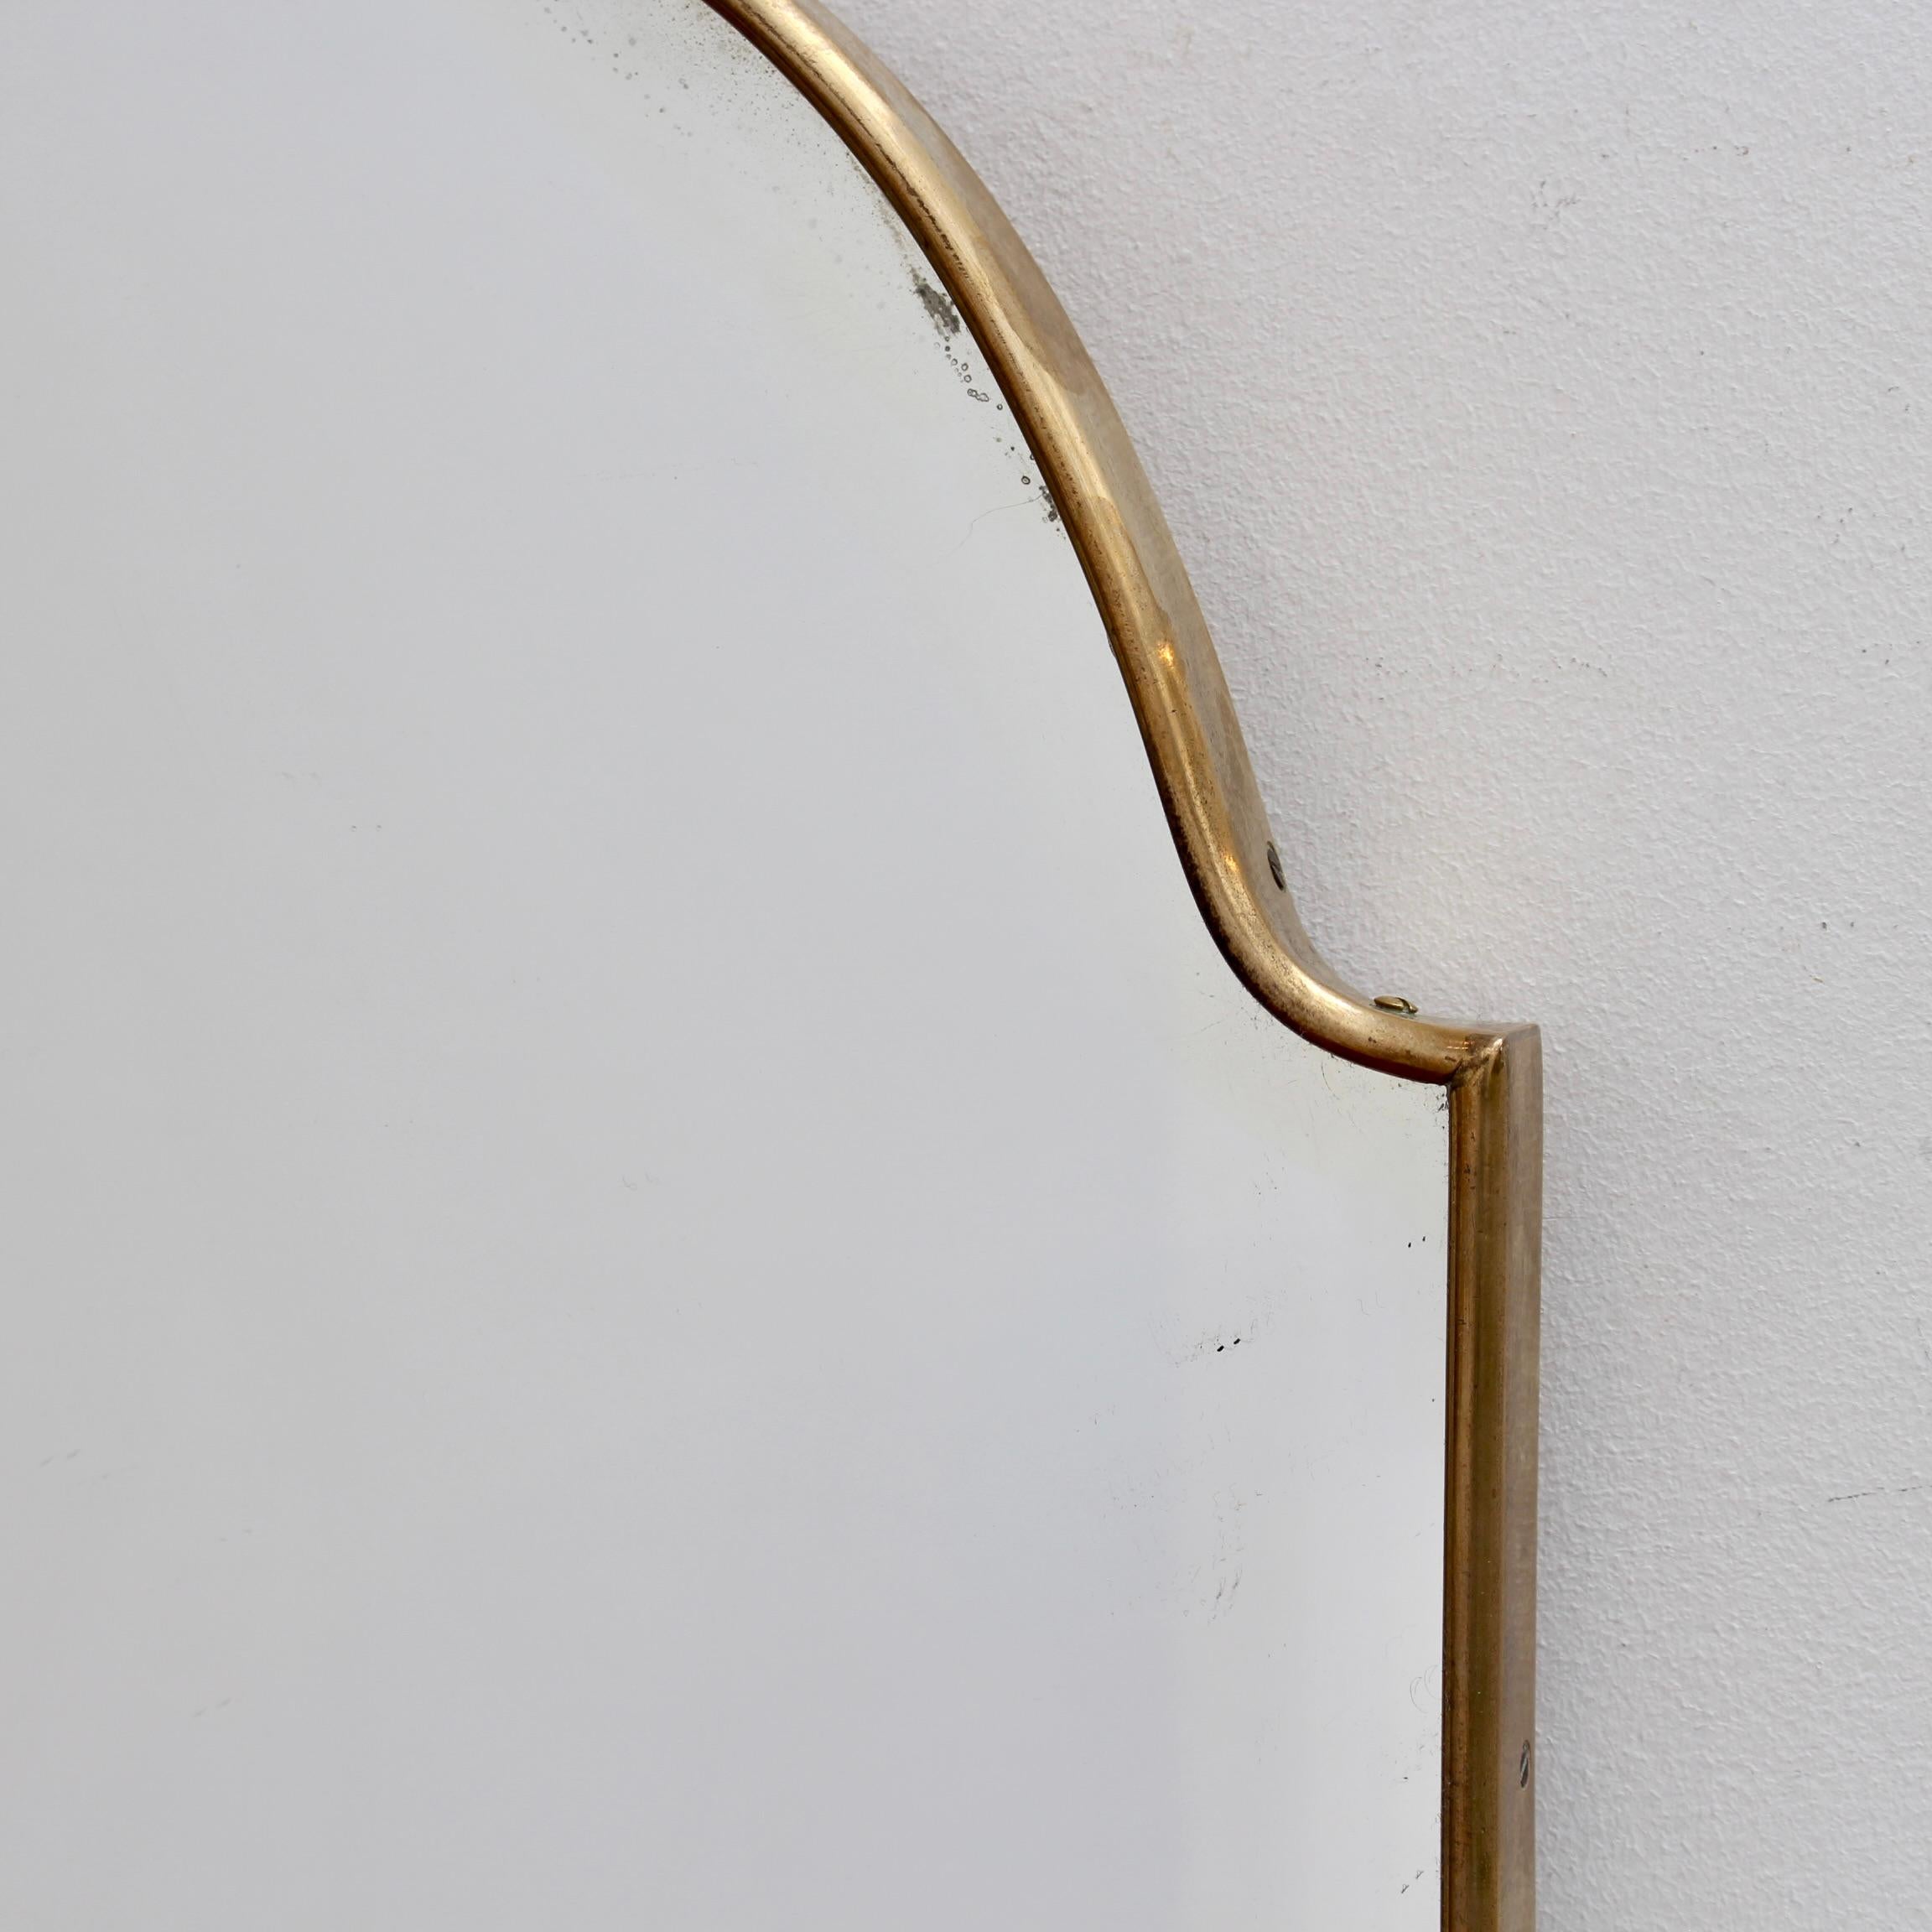 Vintage Italian Wall Mirror with Brass Frame (circa 1950s) - Small For Sale 2